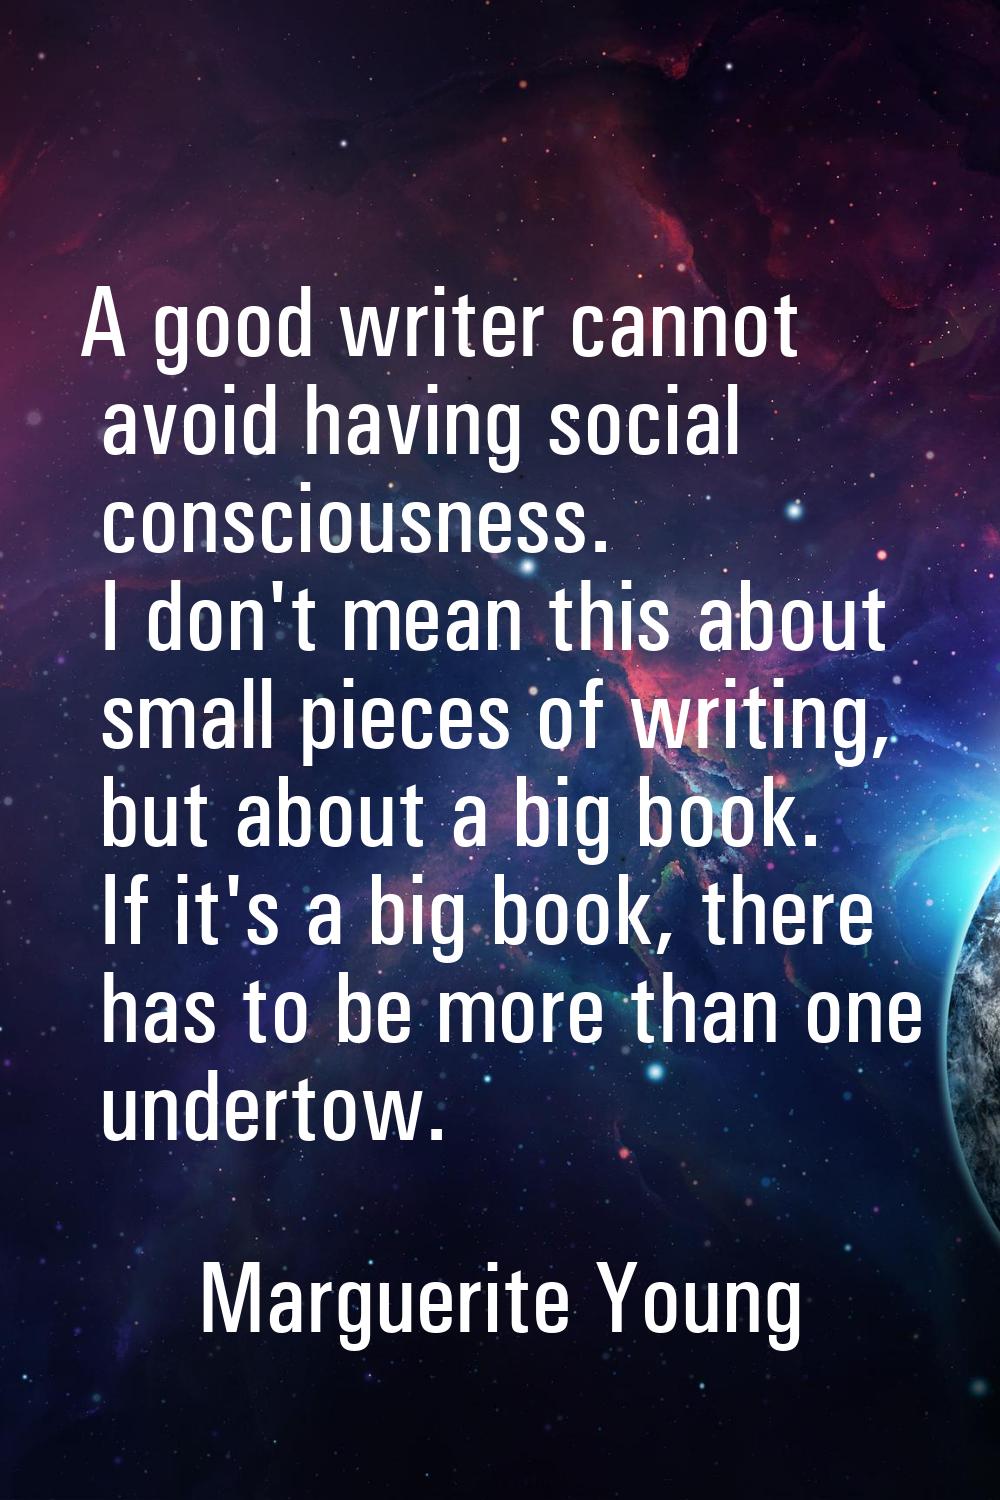 A good writer cannot avoid having social consciousness. I don't mean this about small pieces of wri